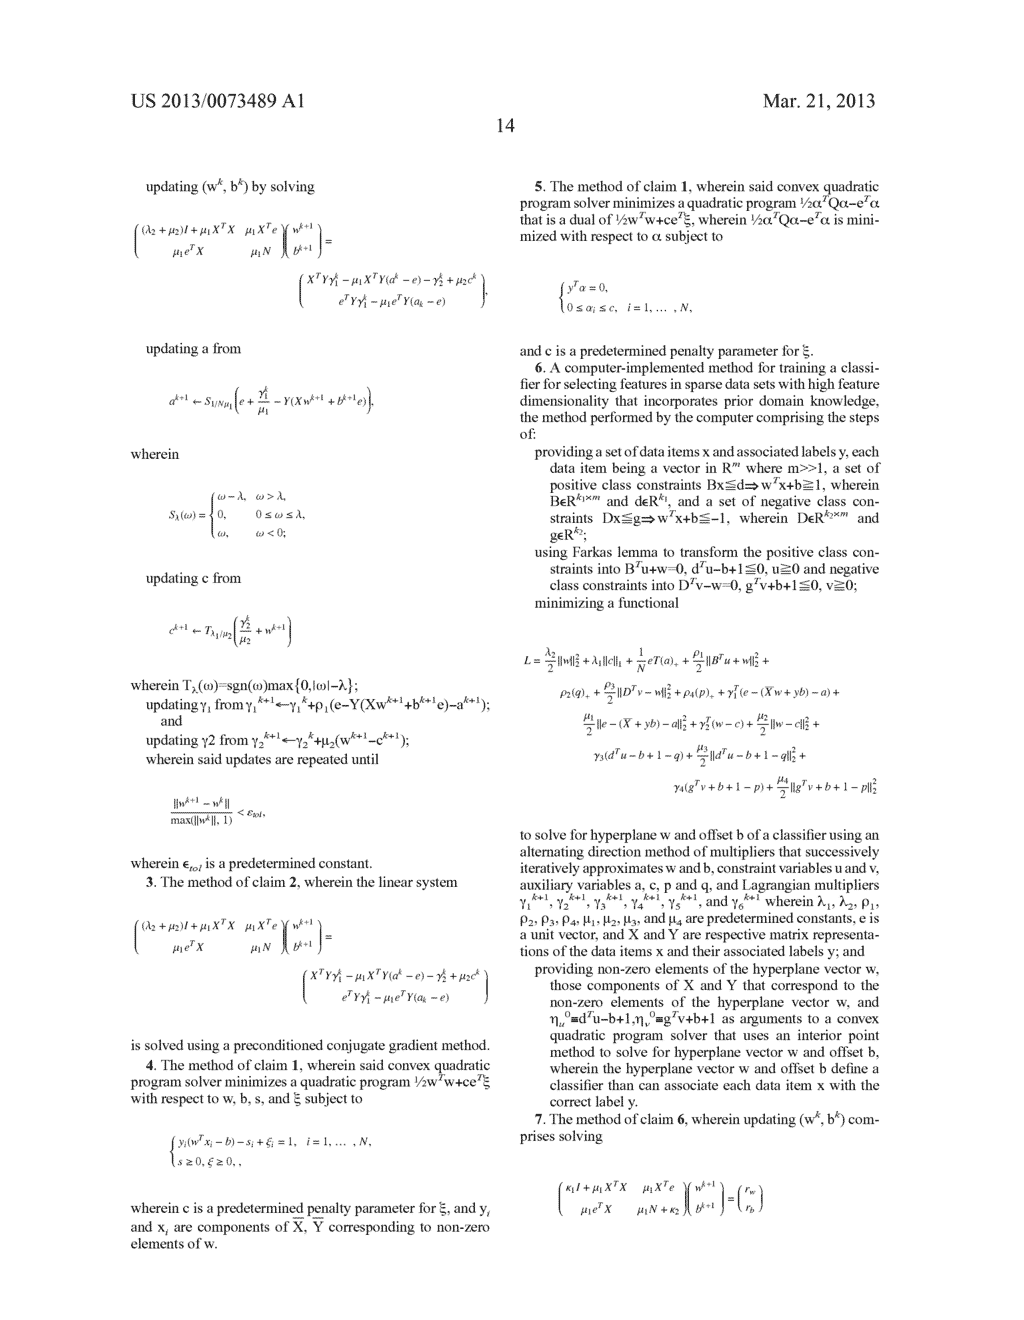 HYBRID INTERIOR-POINT ALTERNATING DIRECTIONS ALGORITHM FOR SUPPORT VECTOR     MACHINES AND FEATURE SELECTION - diagram, schematic, and image 26